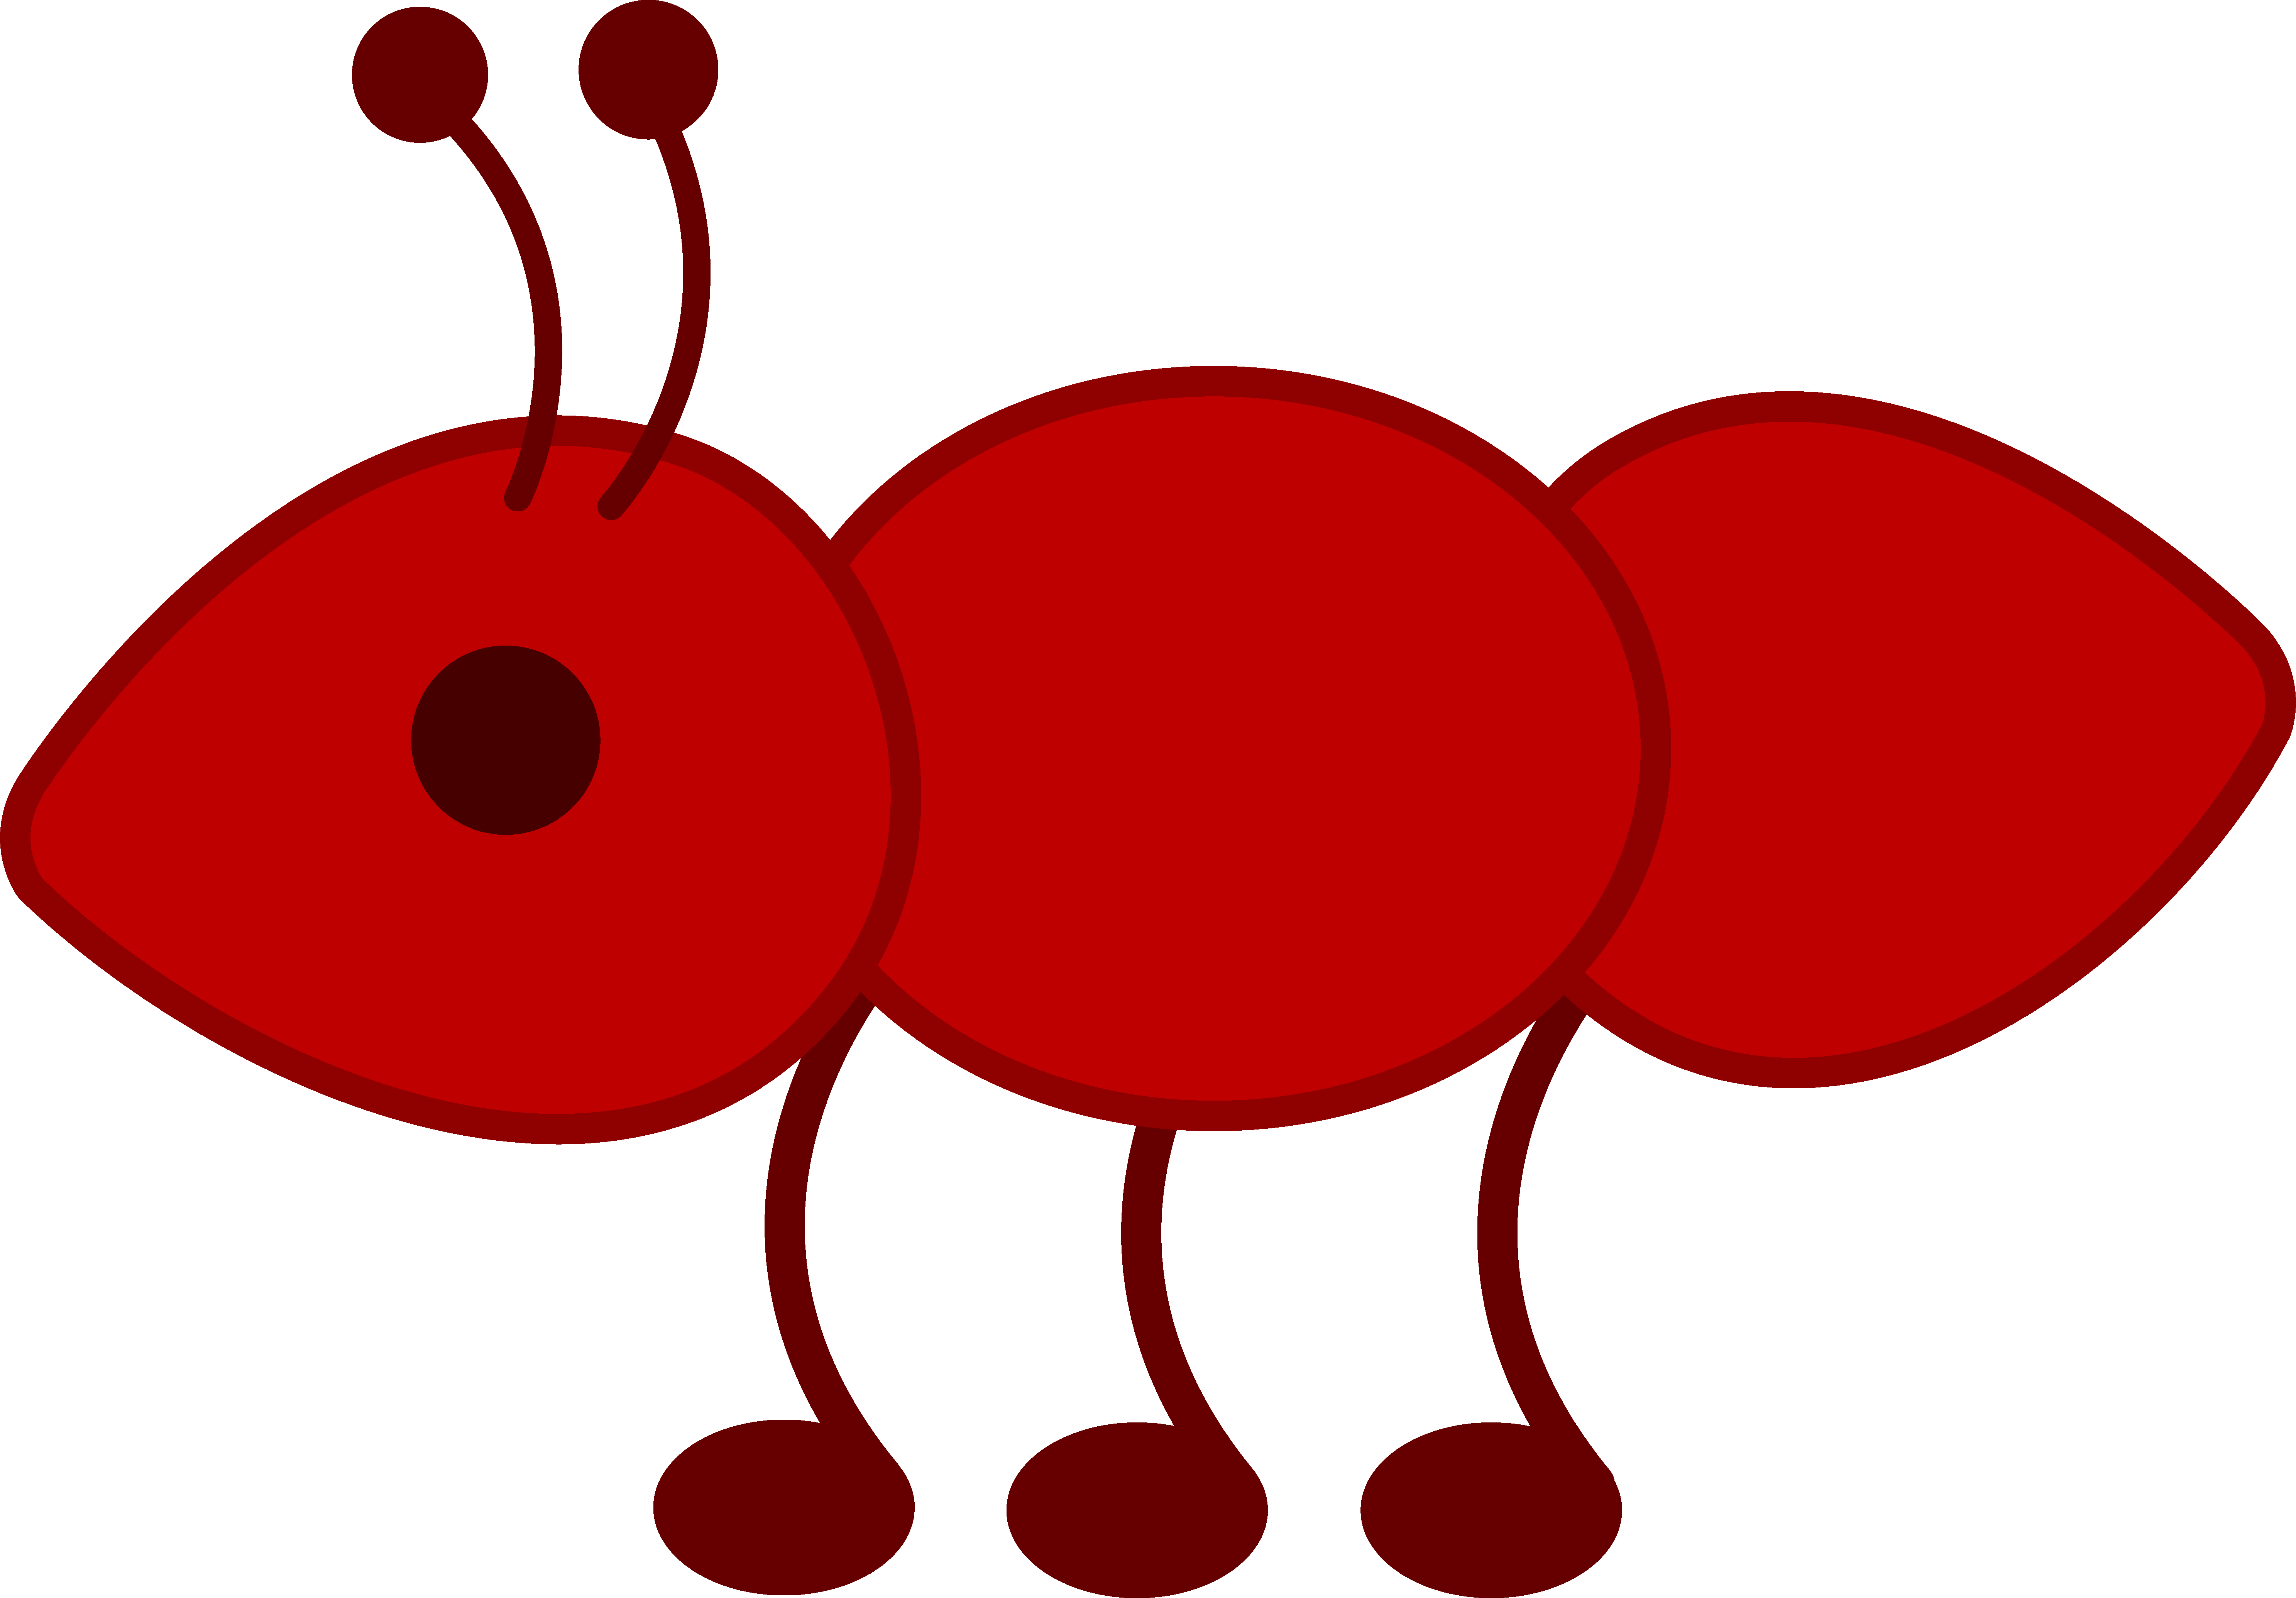 Free Cartoon Ants Cliparts, Download Free Clip Art, Free.